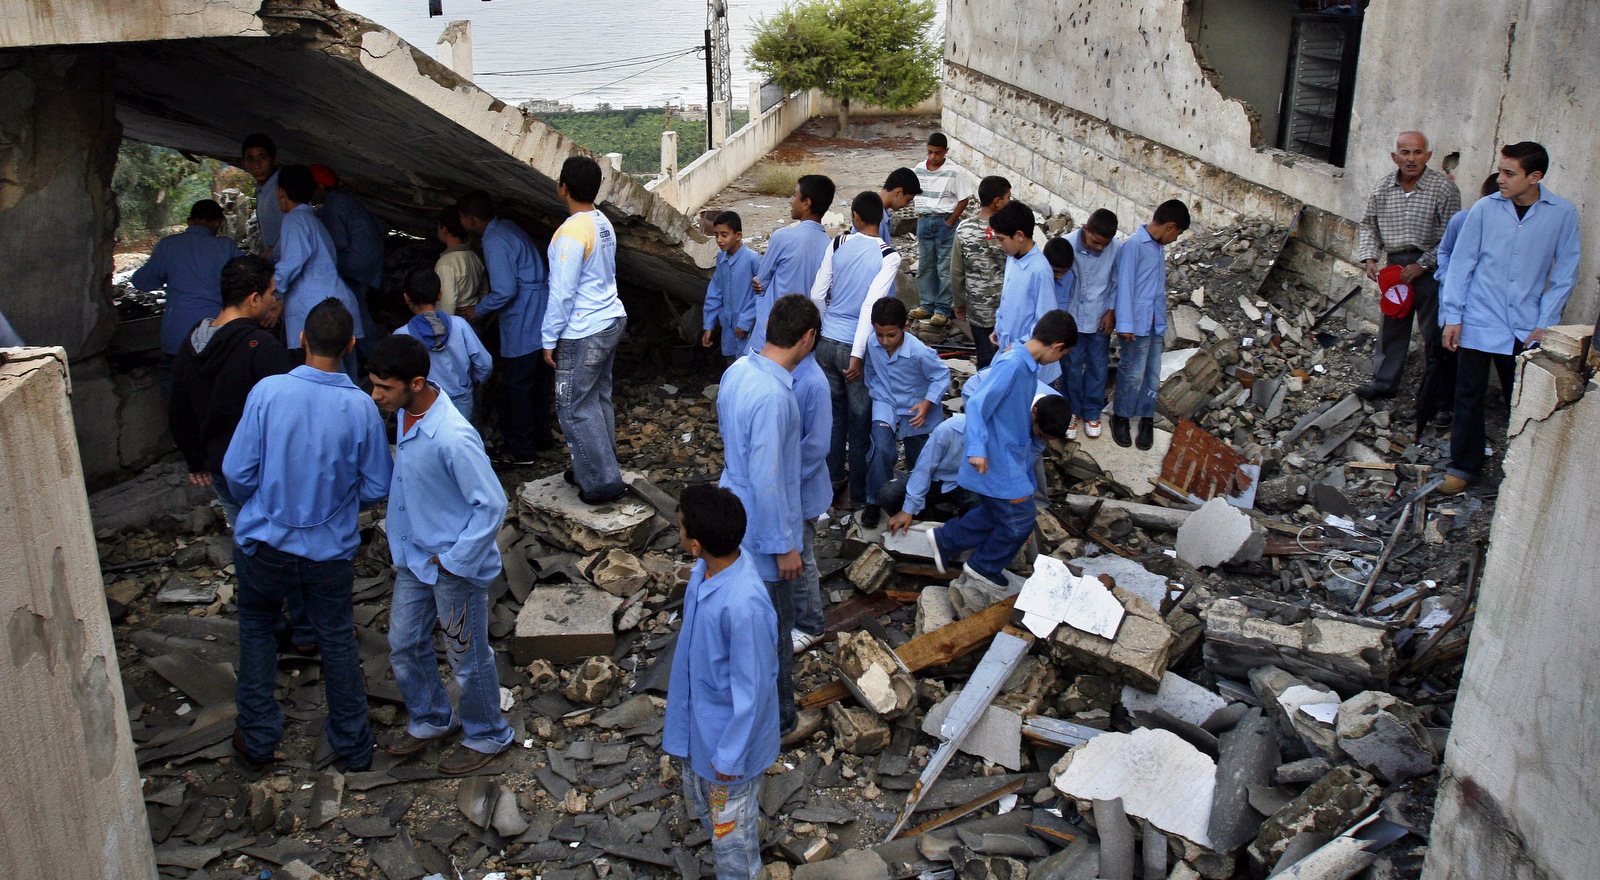 Lebanese students stand in the Ansarieh Public School that was destroyed during Israel's attack on Lebanon, in the southern village of Ansarieh, Oct. 16, 2006. (AP/Mohammed Zaatari)